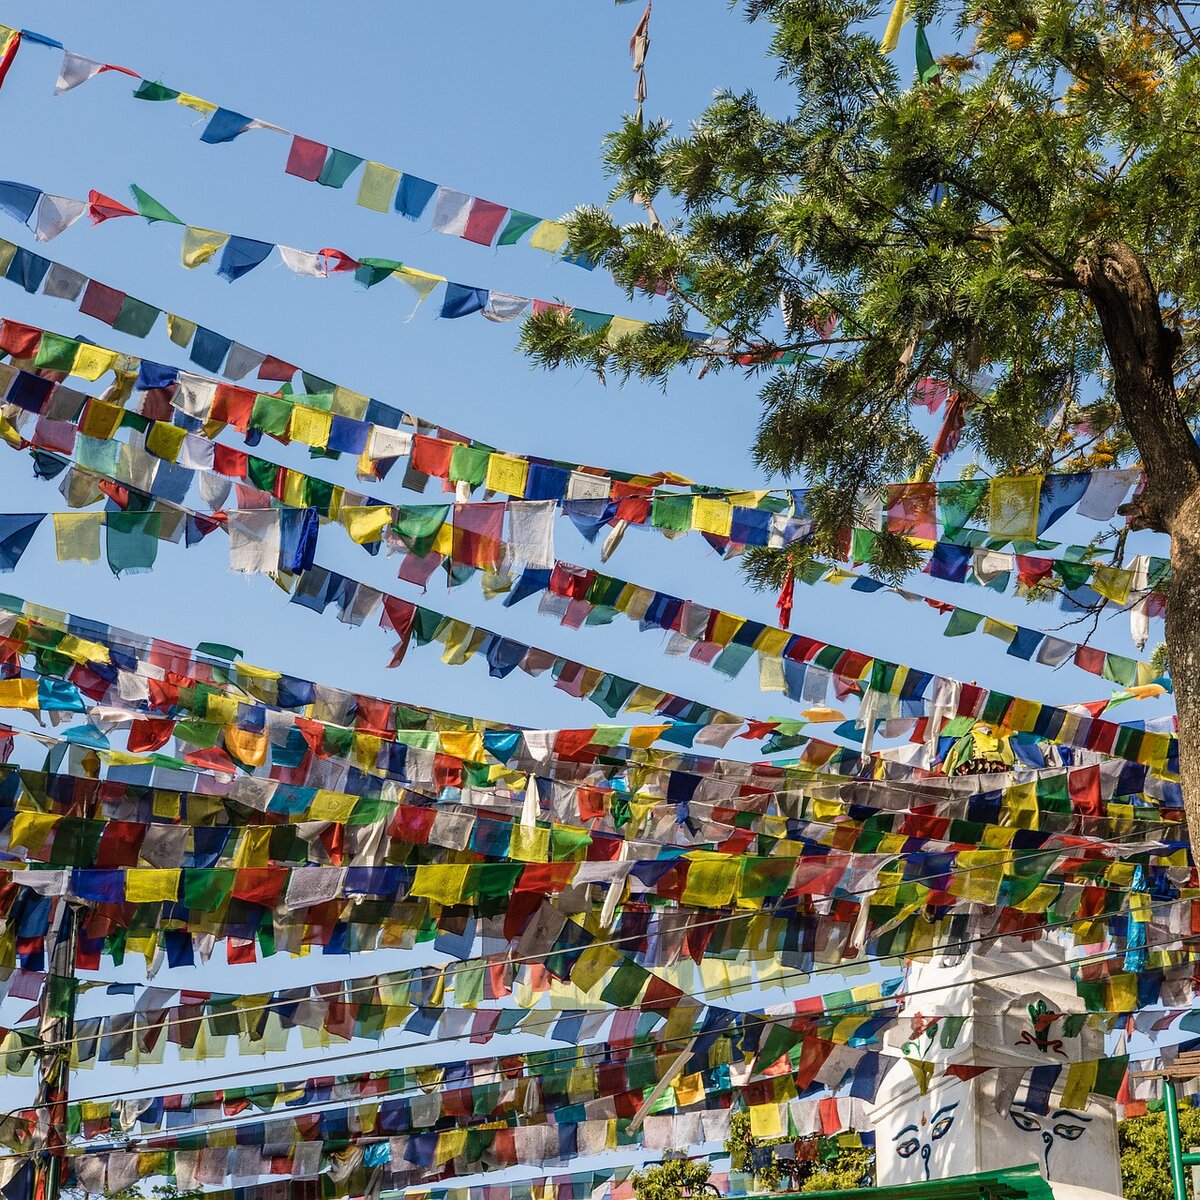 Prayer flags flying in the wind in Nepal